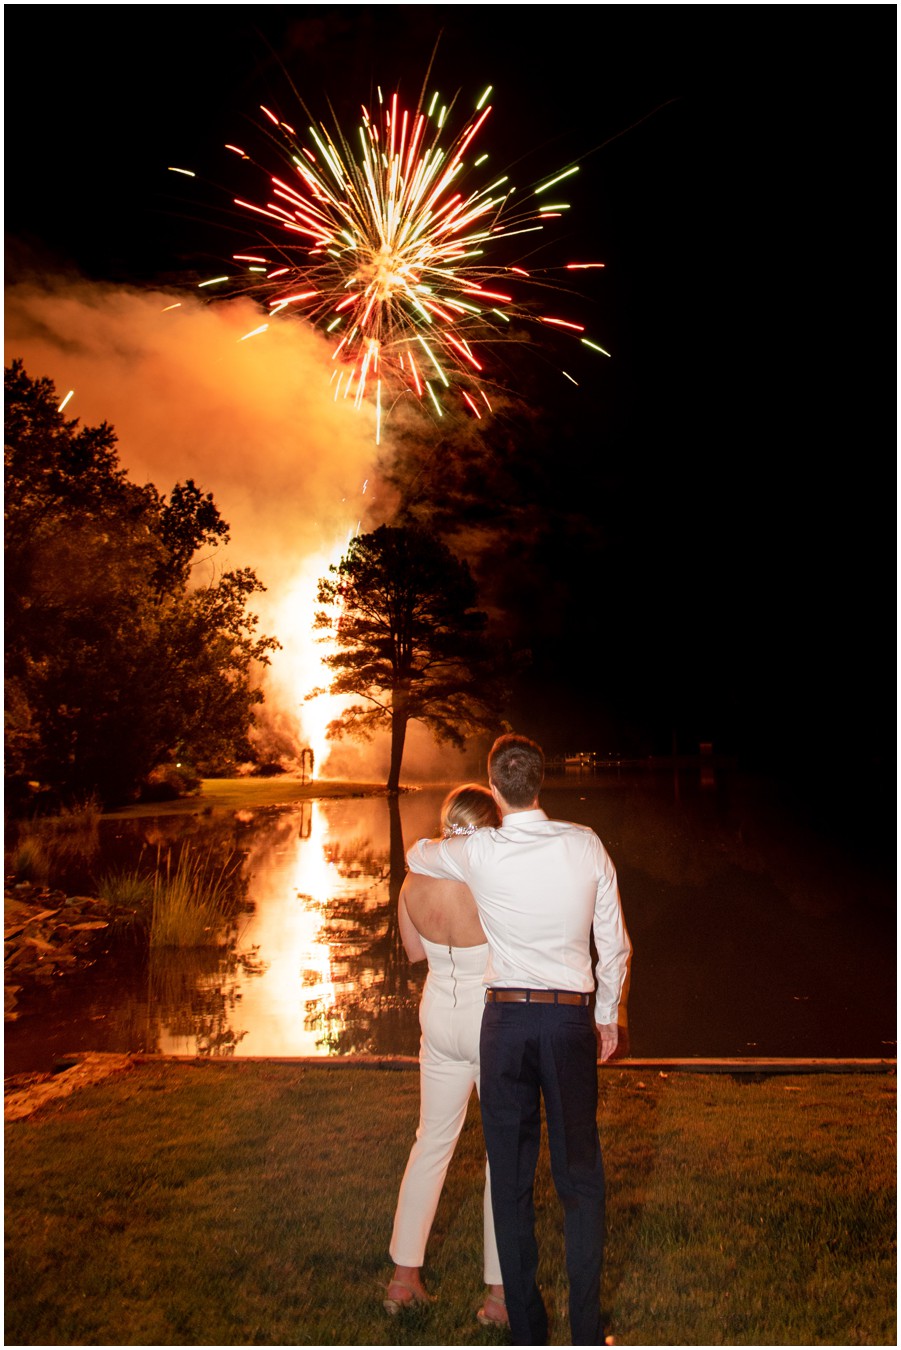 Fireworks at a wedding at The Oaks Waterfront Inn in St. Michaels, MD by Melissa Grimes-Guy Photography